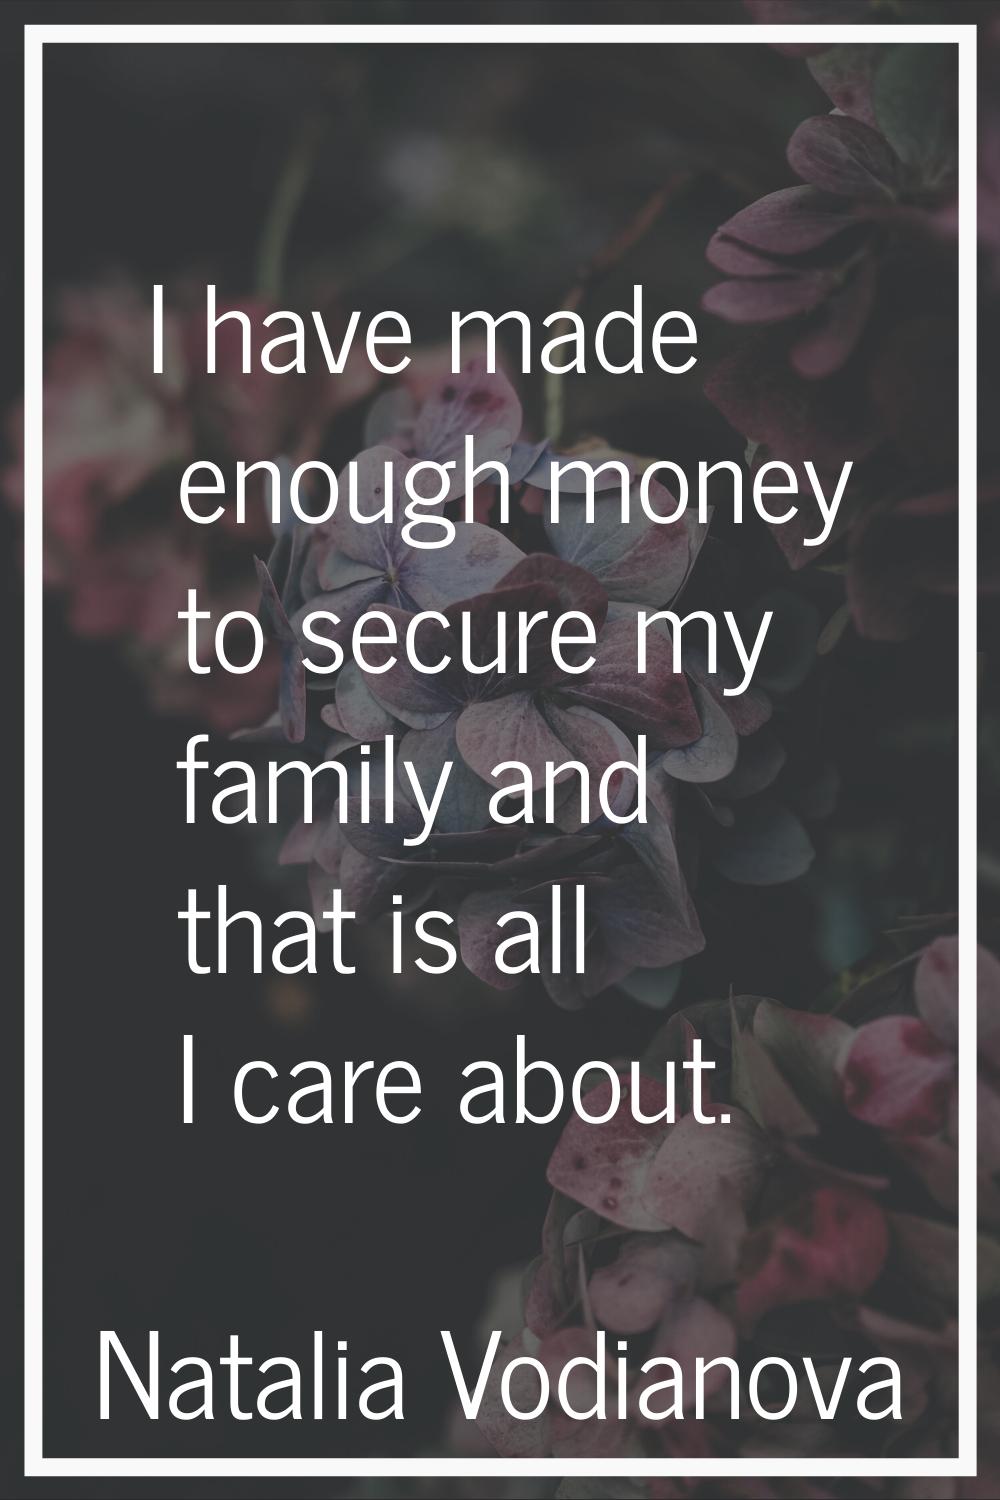 I have made enough money to secure my family and that is all I care about.